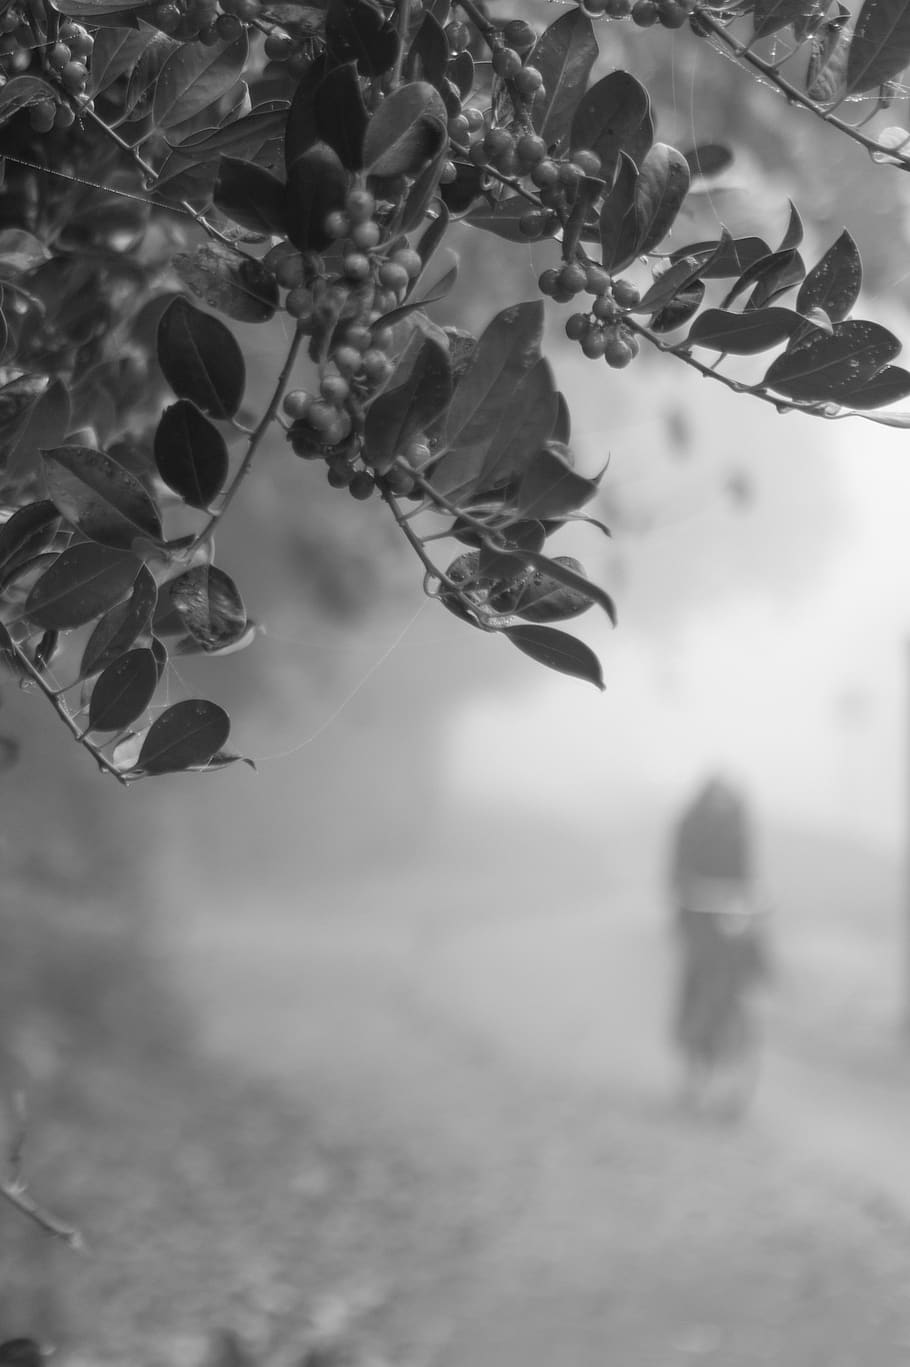 biking, cyclist, haze, fog, mist, ghost, branch, leave, black and white, bicycle